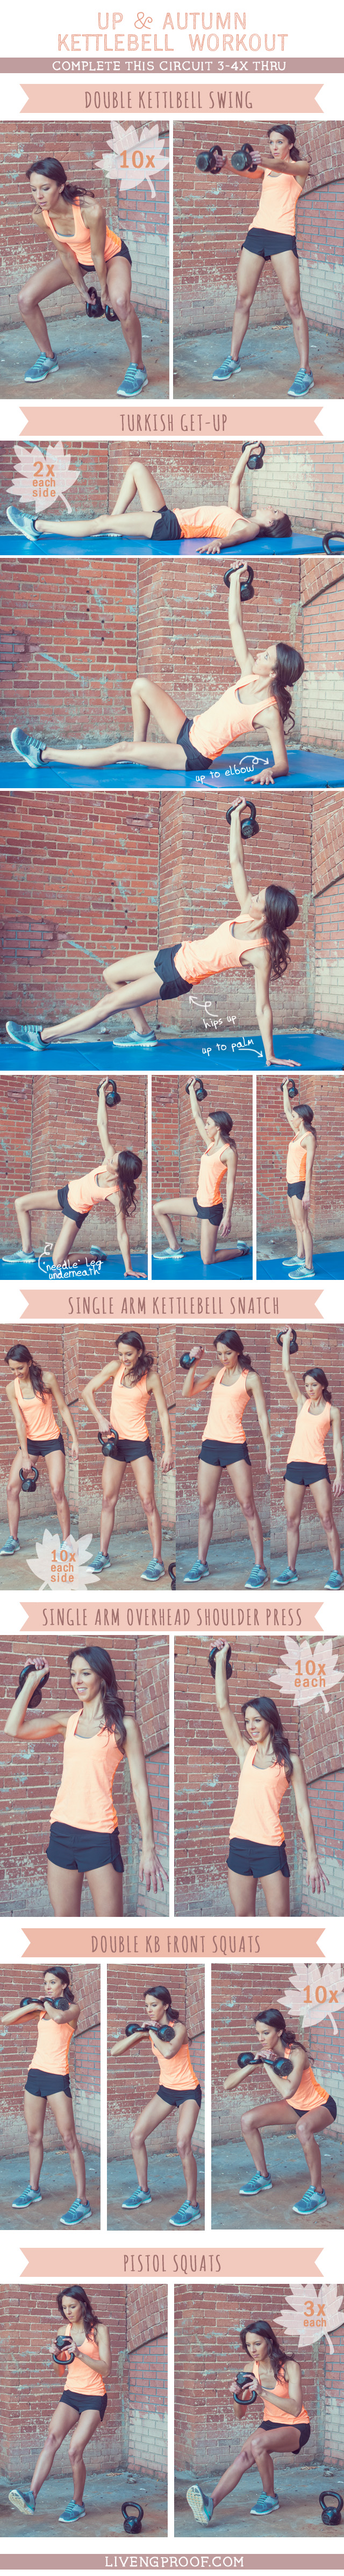 Up and Autumn Kettlebell workout